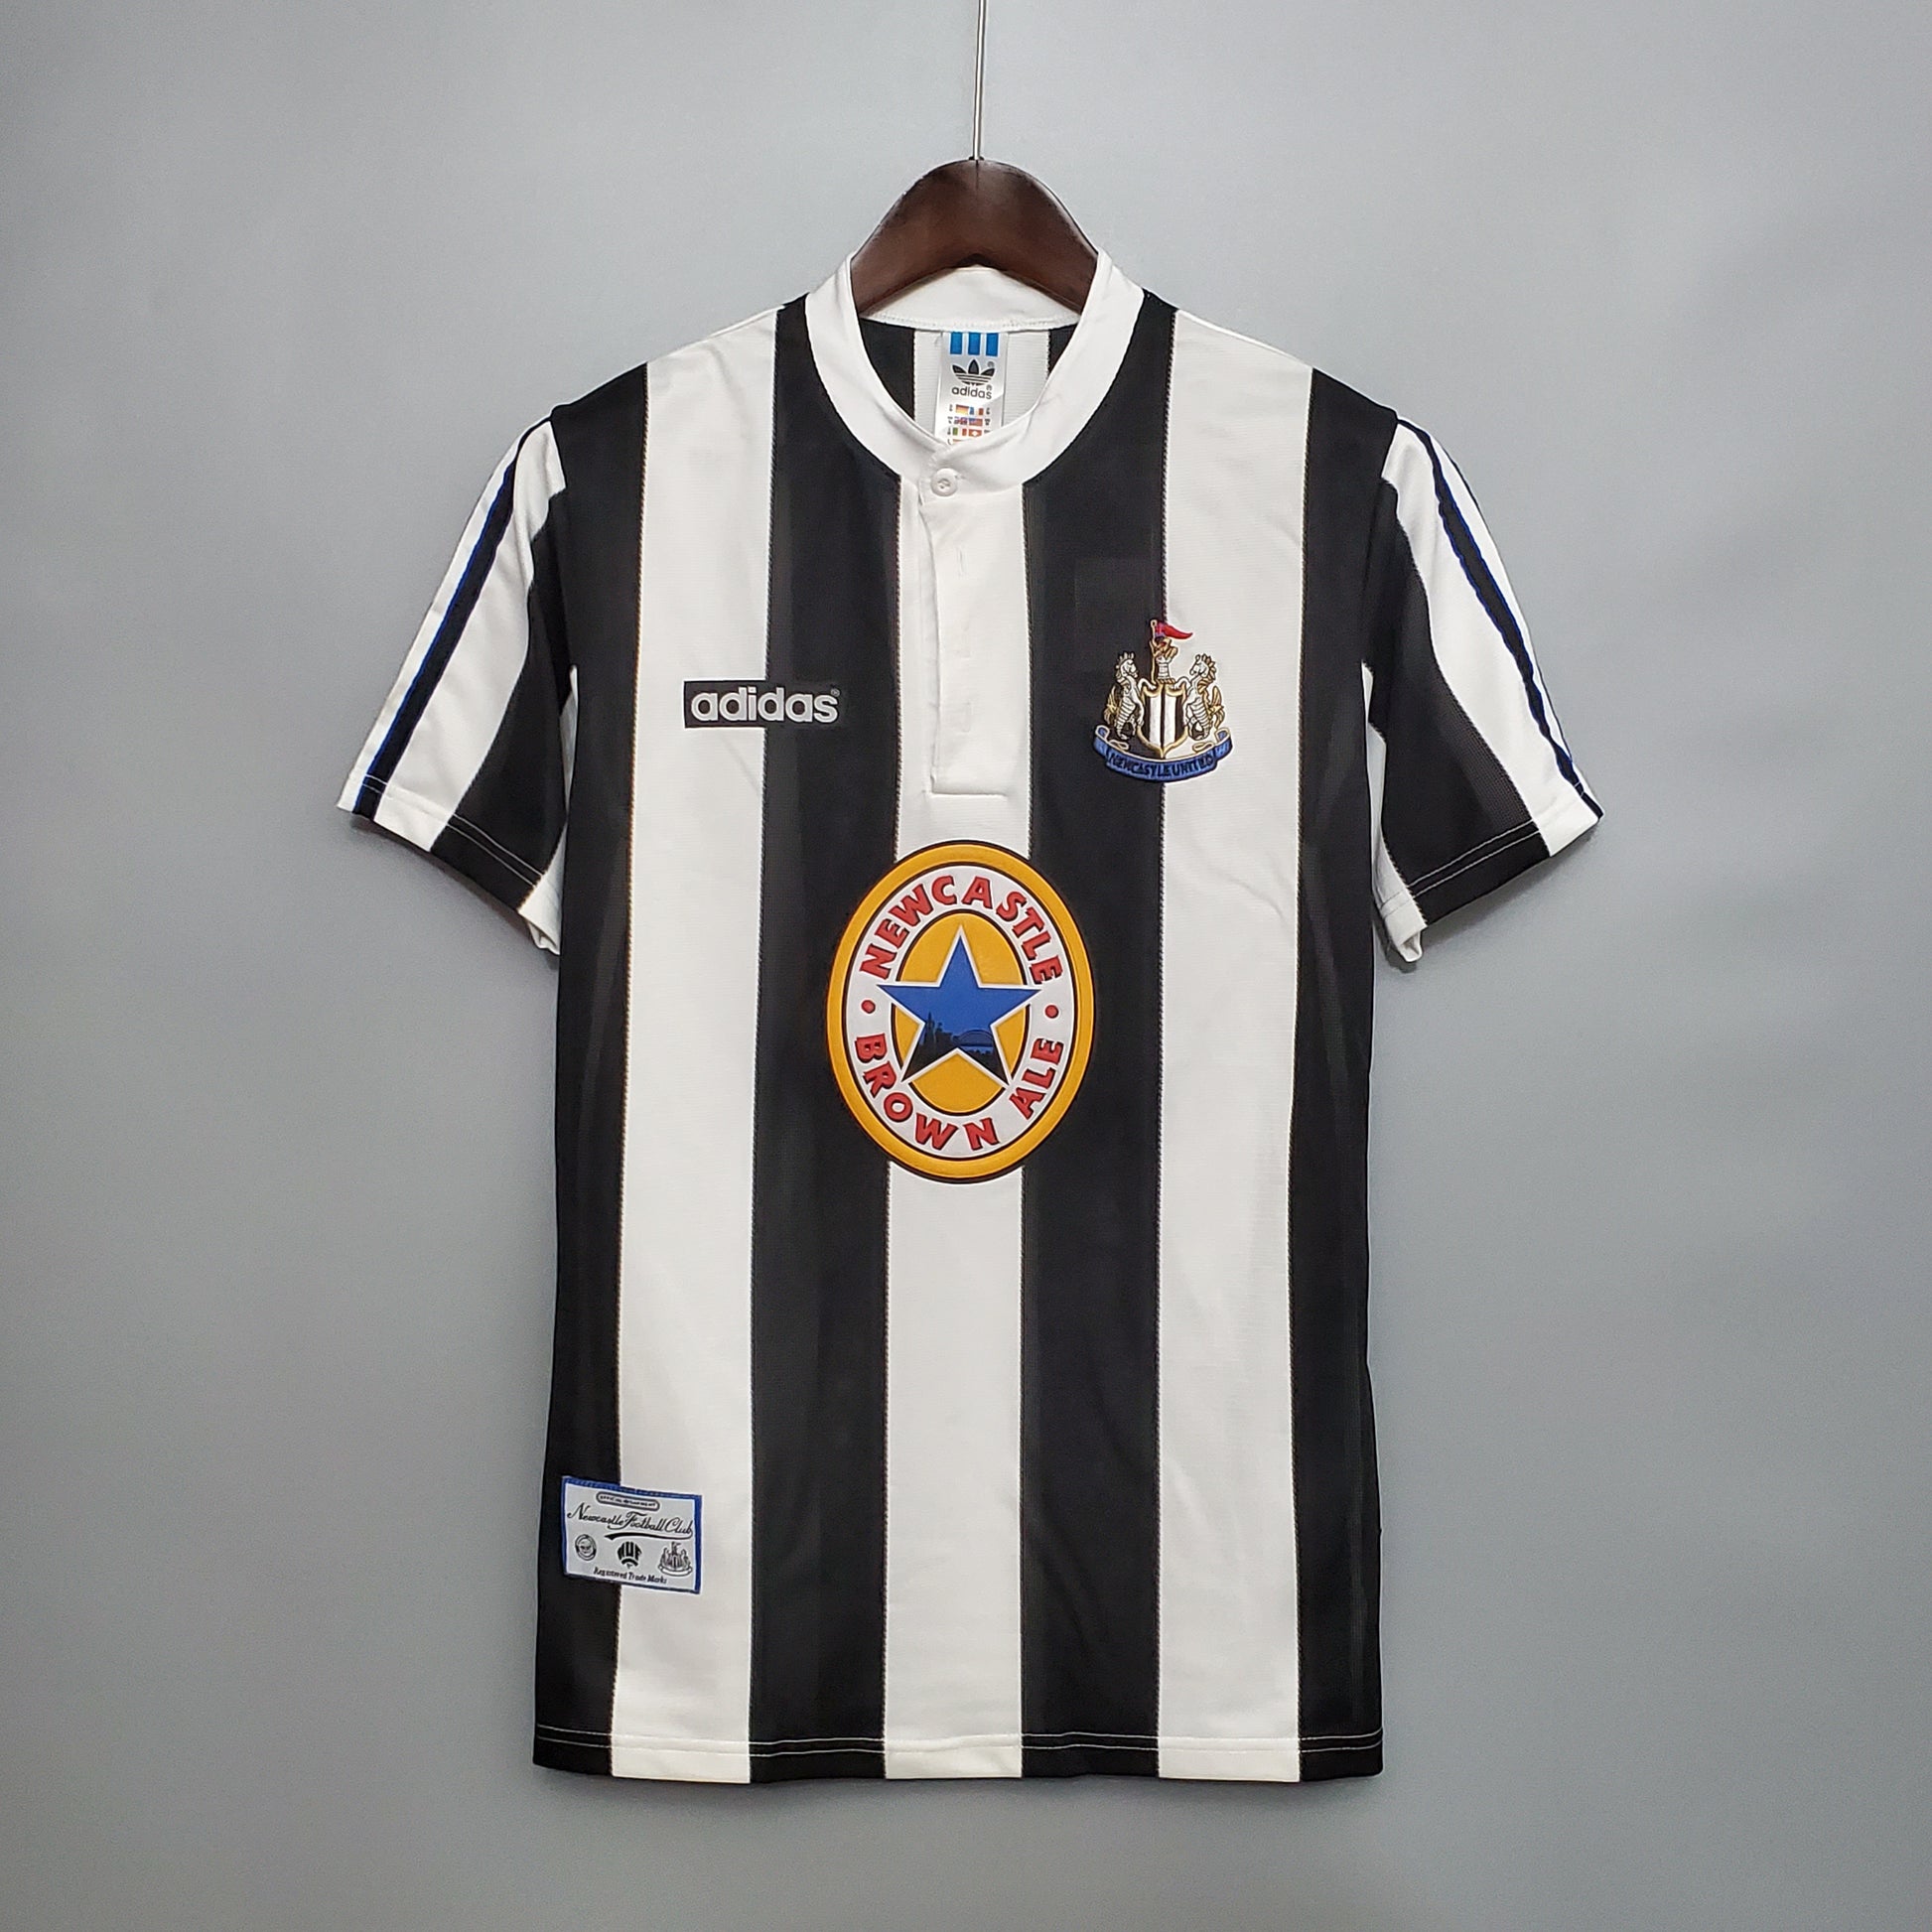 Newcastle 1995-97 Home shirt size L (Excellent) – El Clasico Football